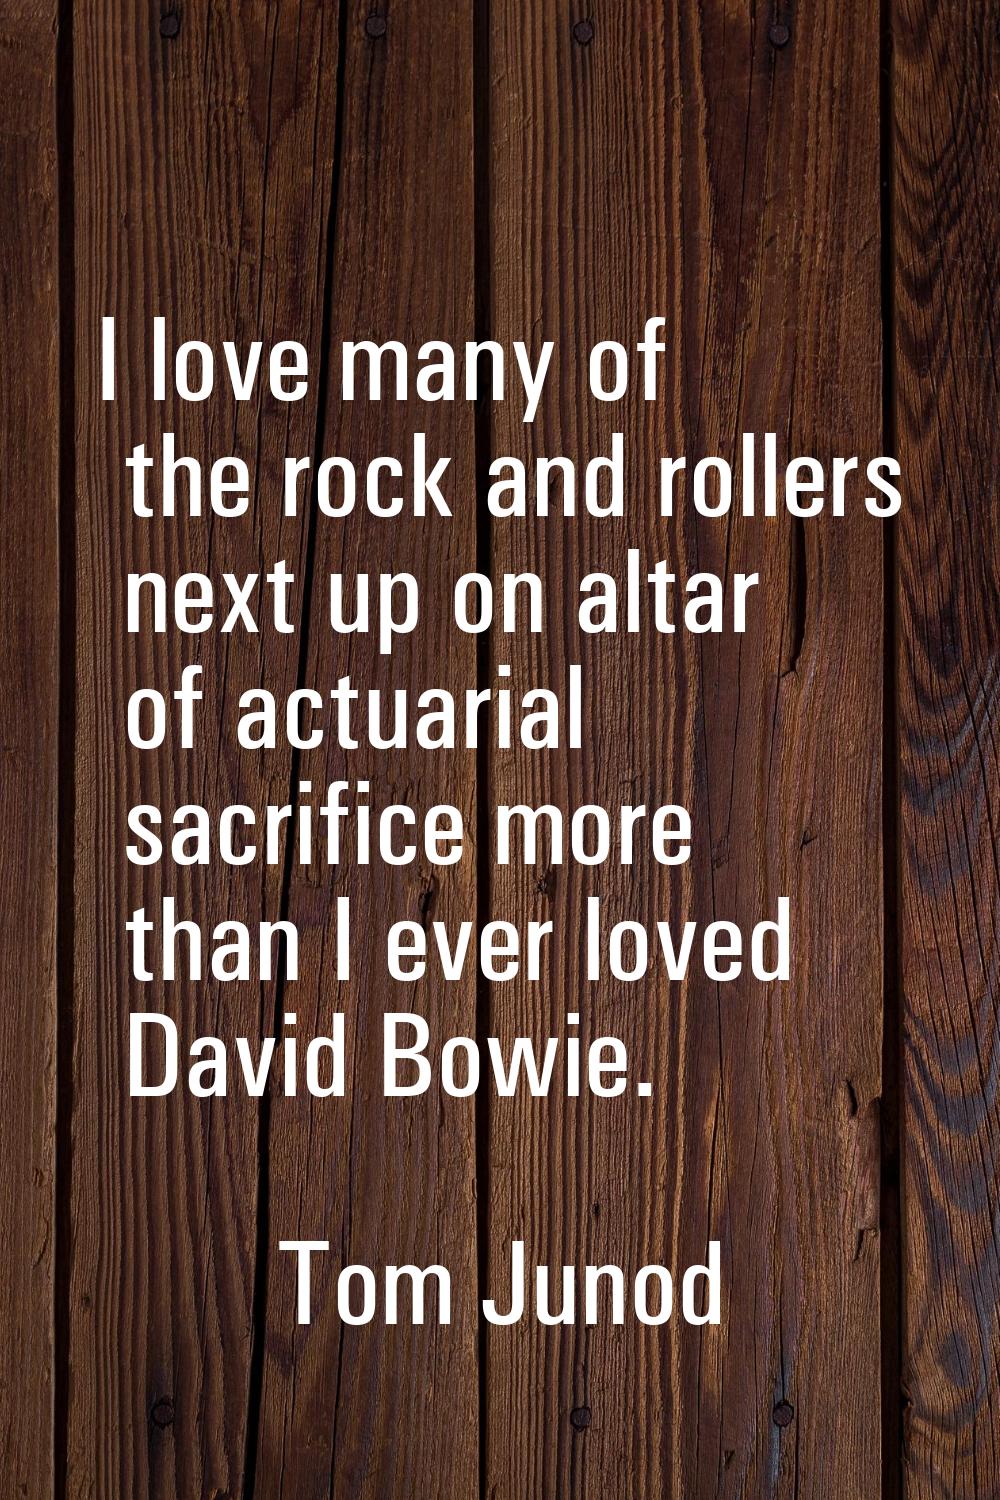 I love many of the rock and rollers next up on altar of actuarial sacrifice more than I ever loved 